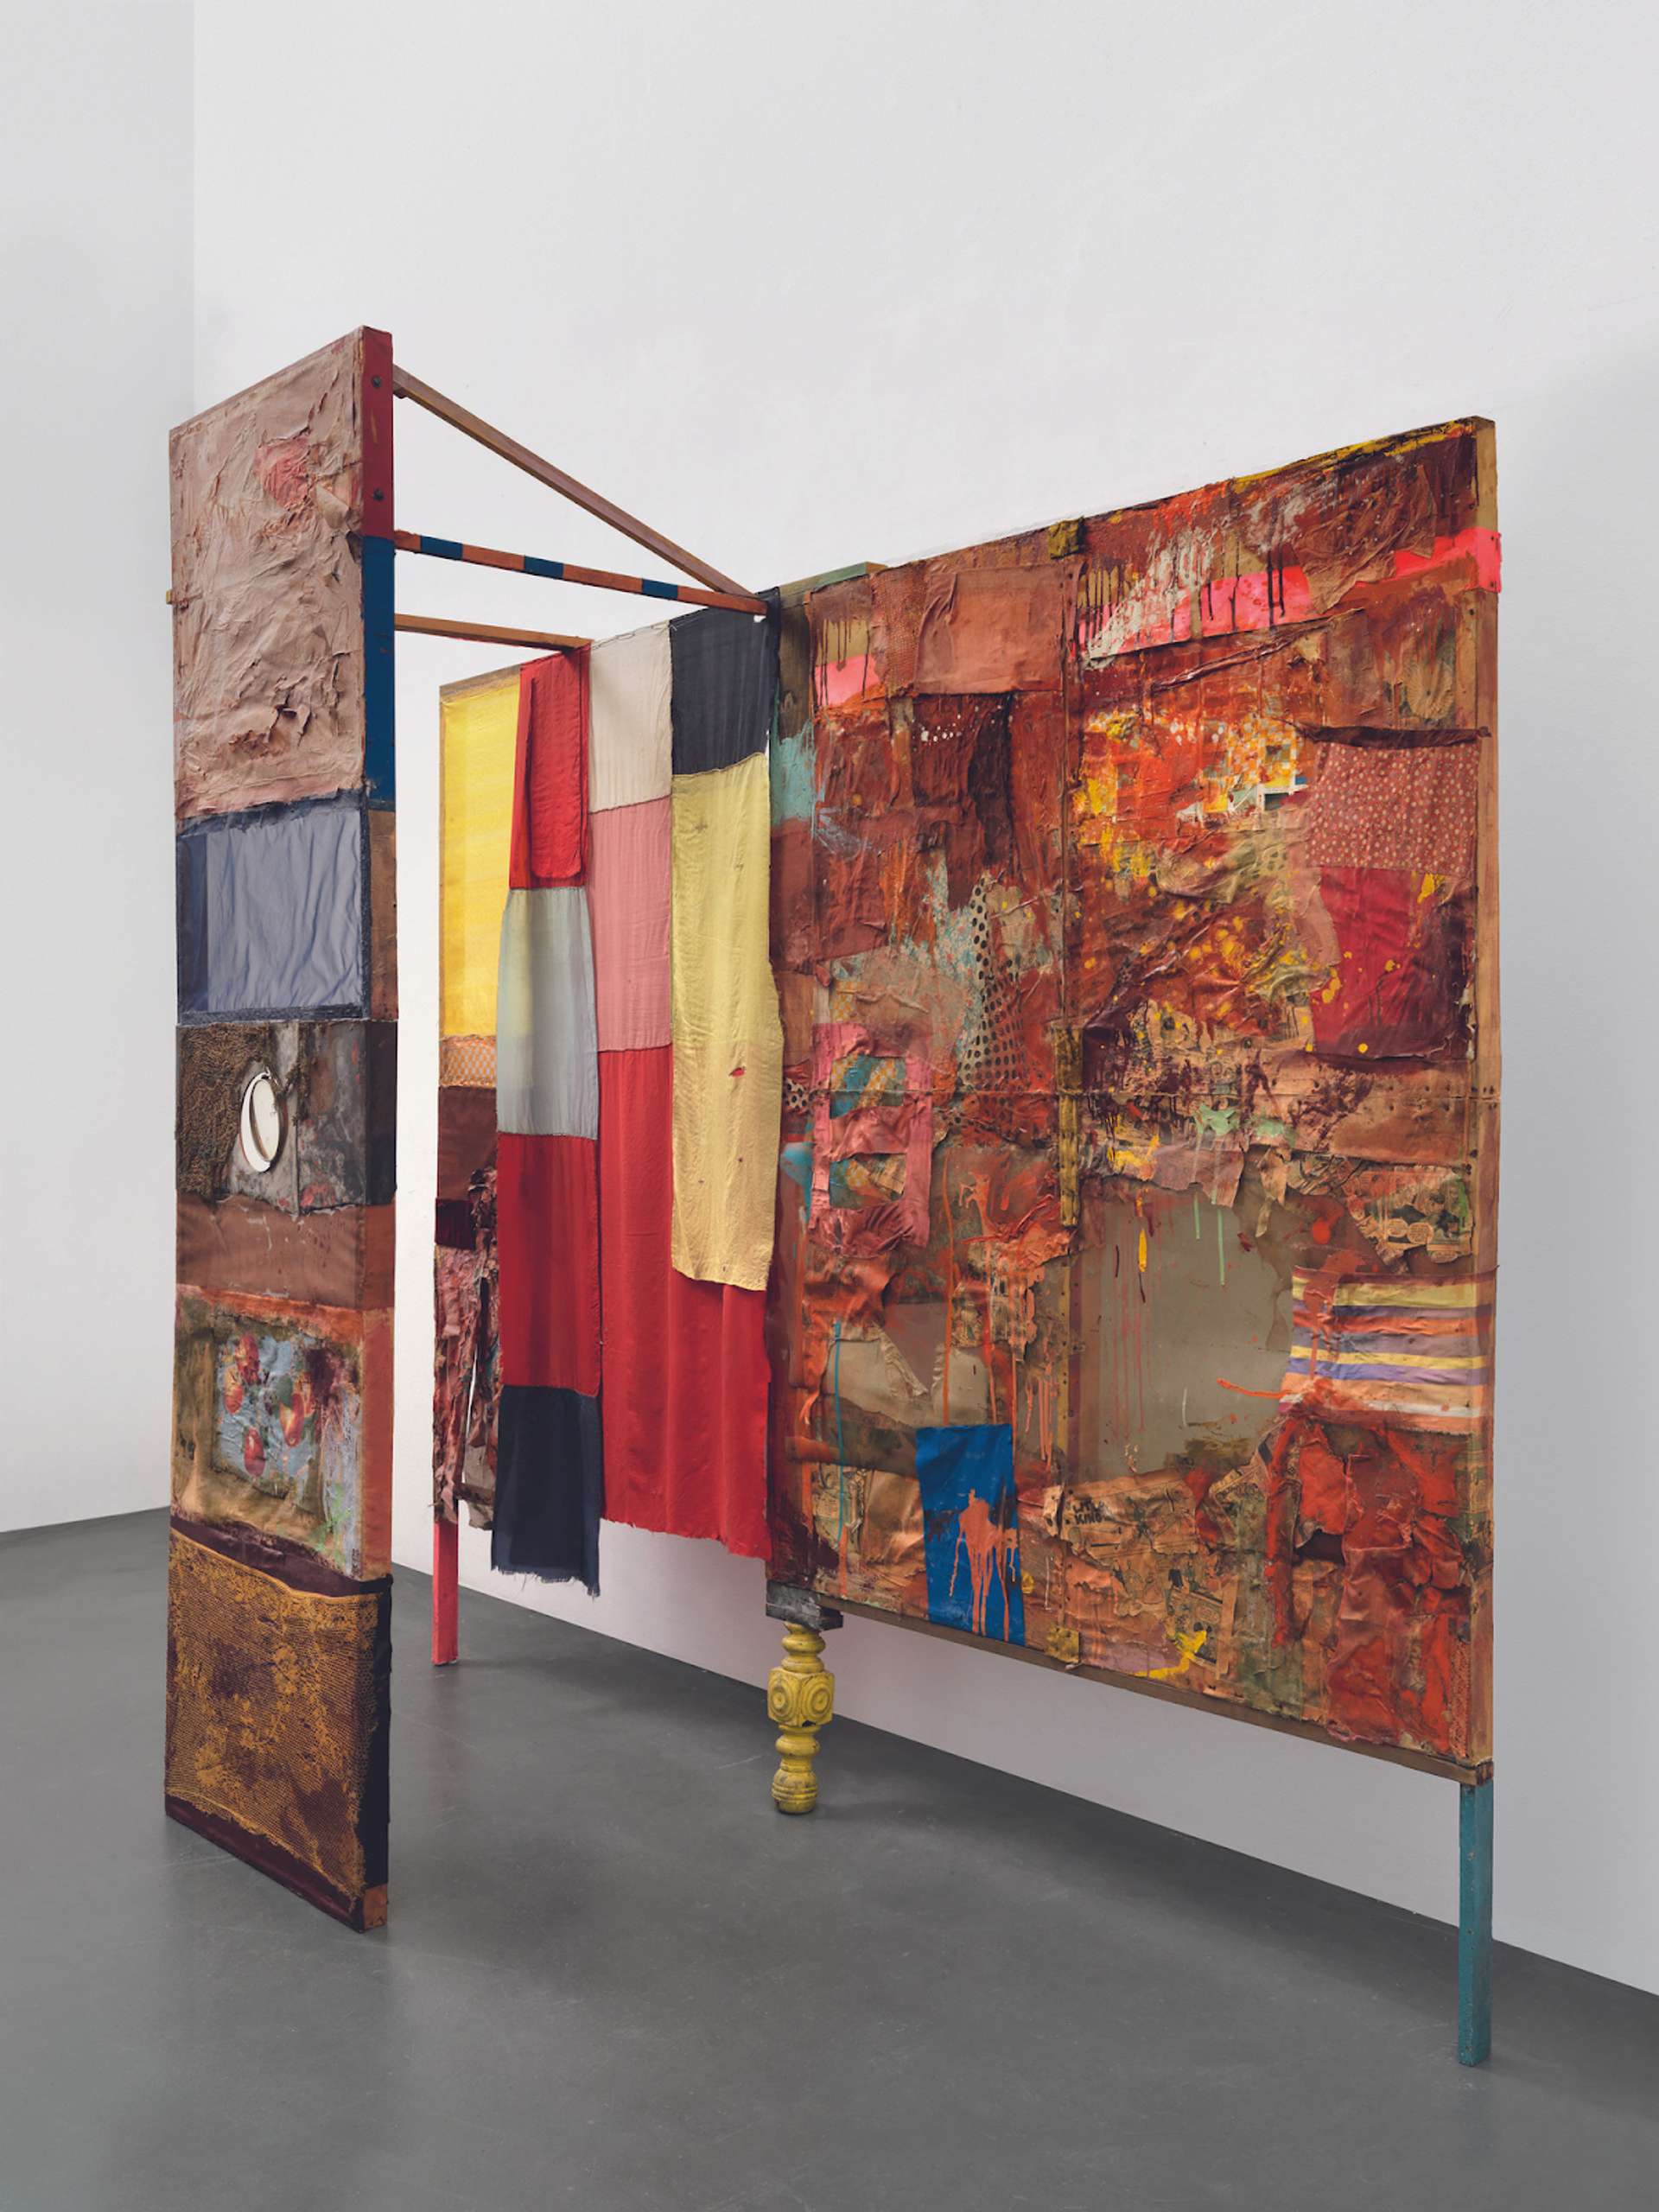 Robert Rauschenberg and Jasper Johns’ Minutiae. An assemblage of multiple placements of fabric that are painted on, incorporated with metal, wood, and newspaper.